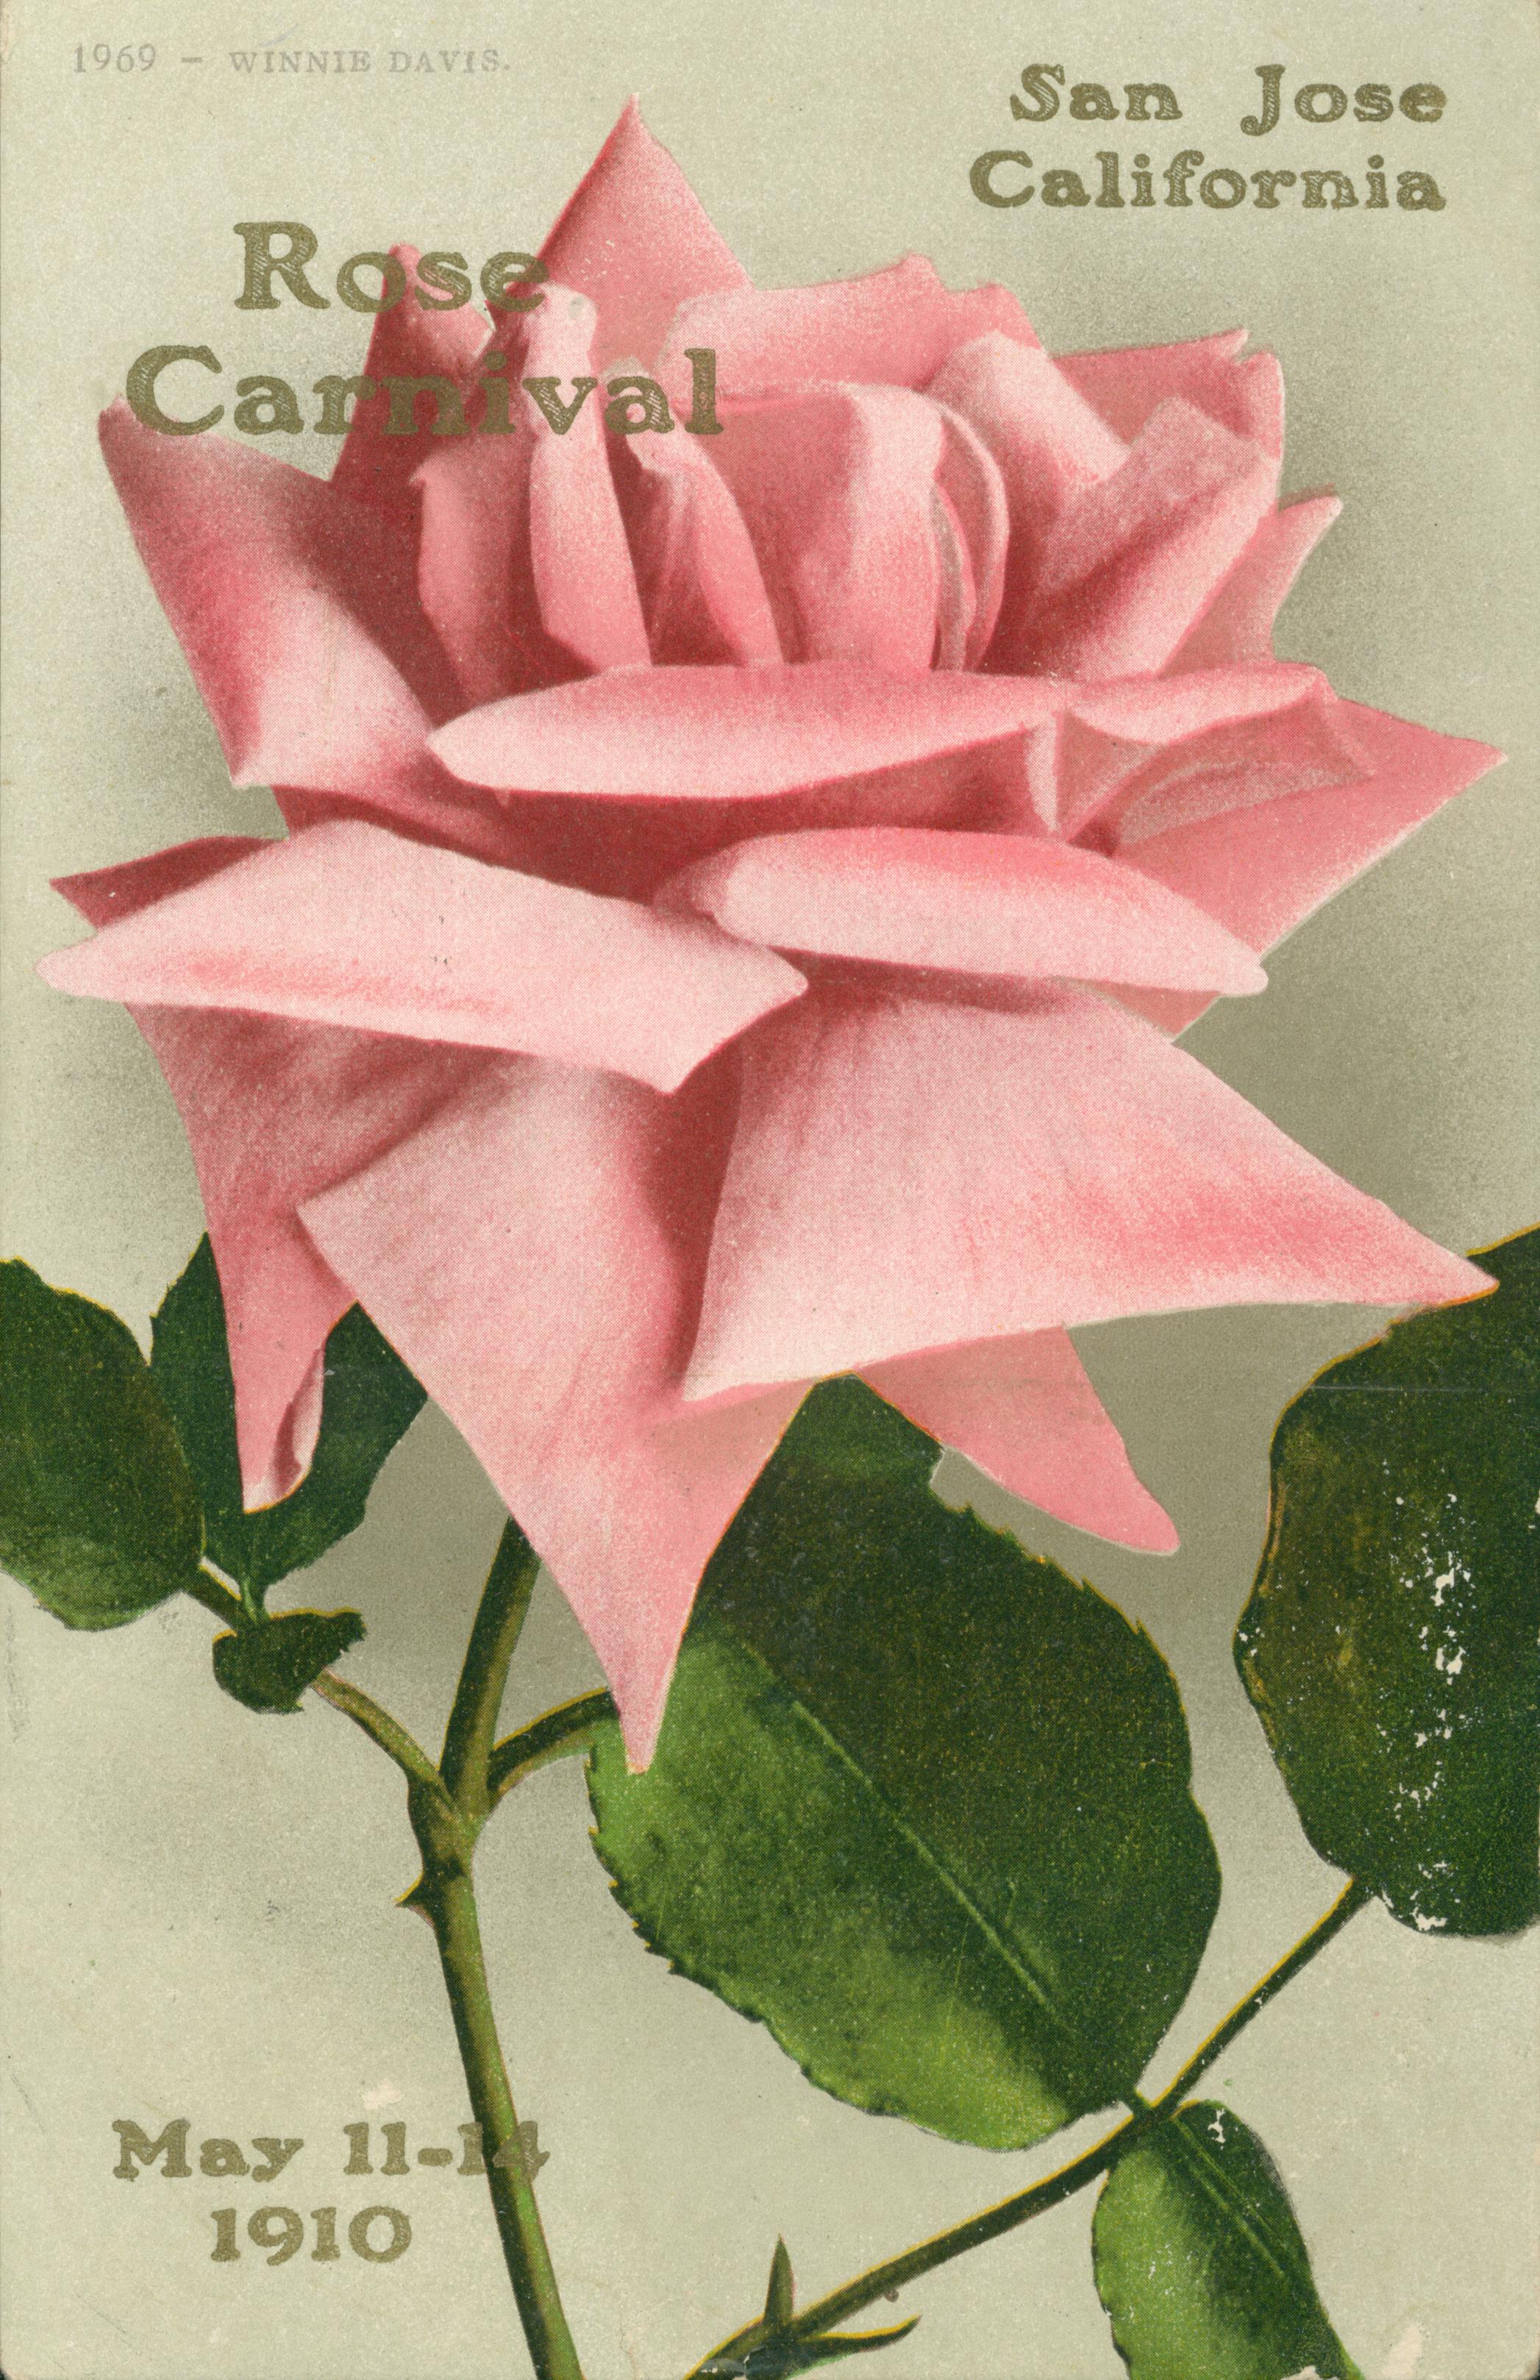 Pink rose with green leaves and text with carnival details